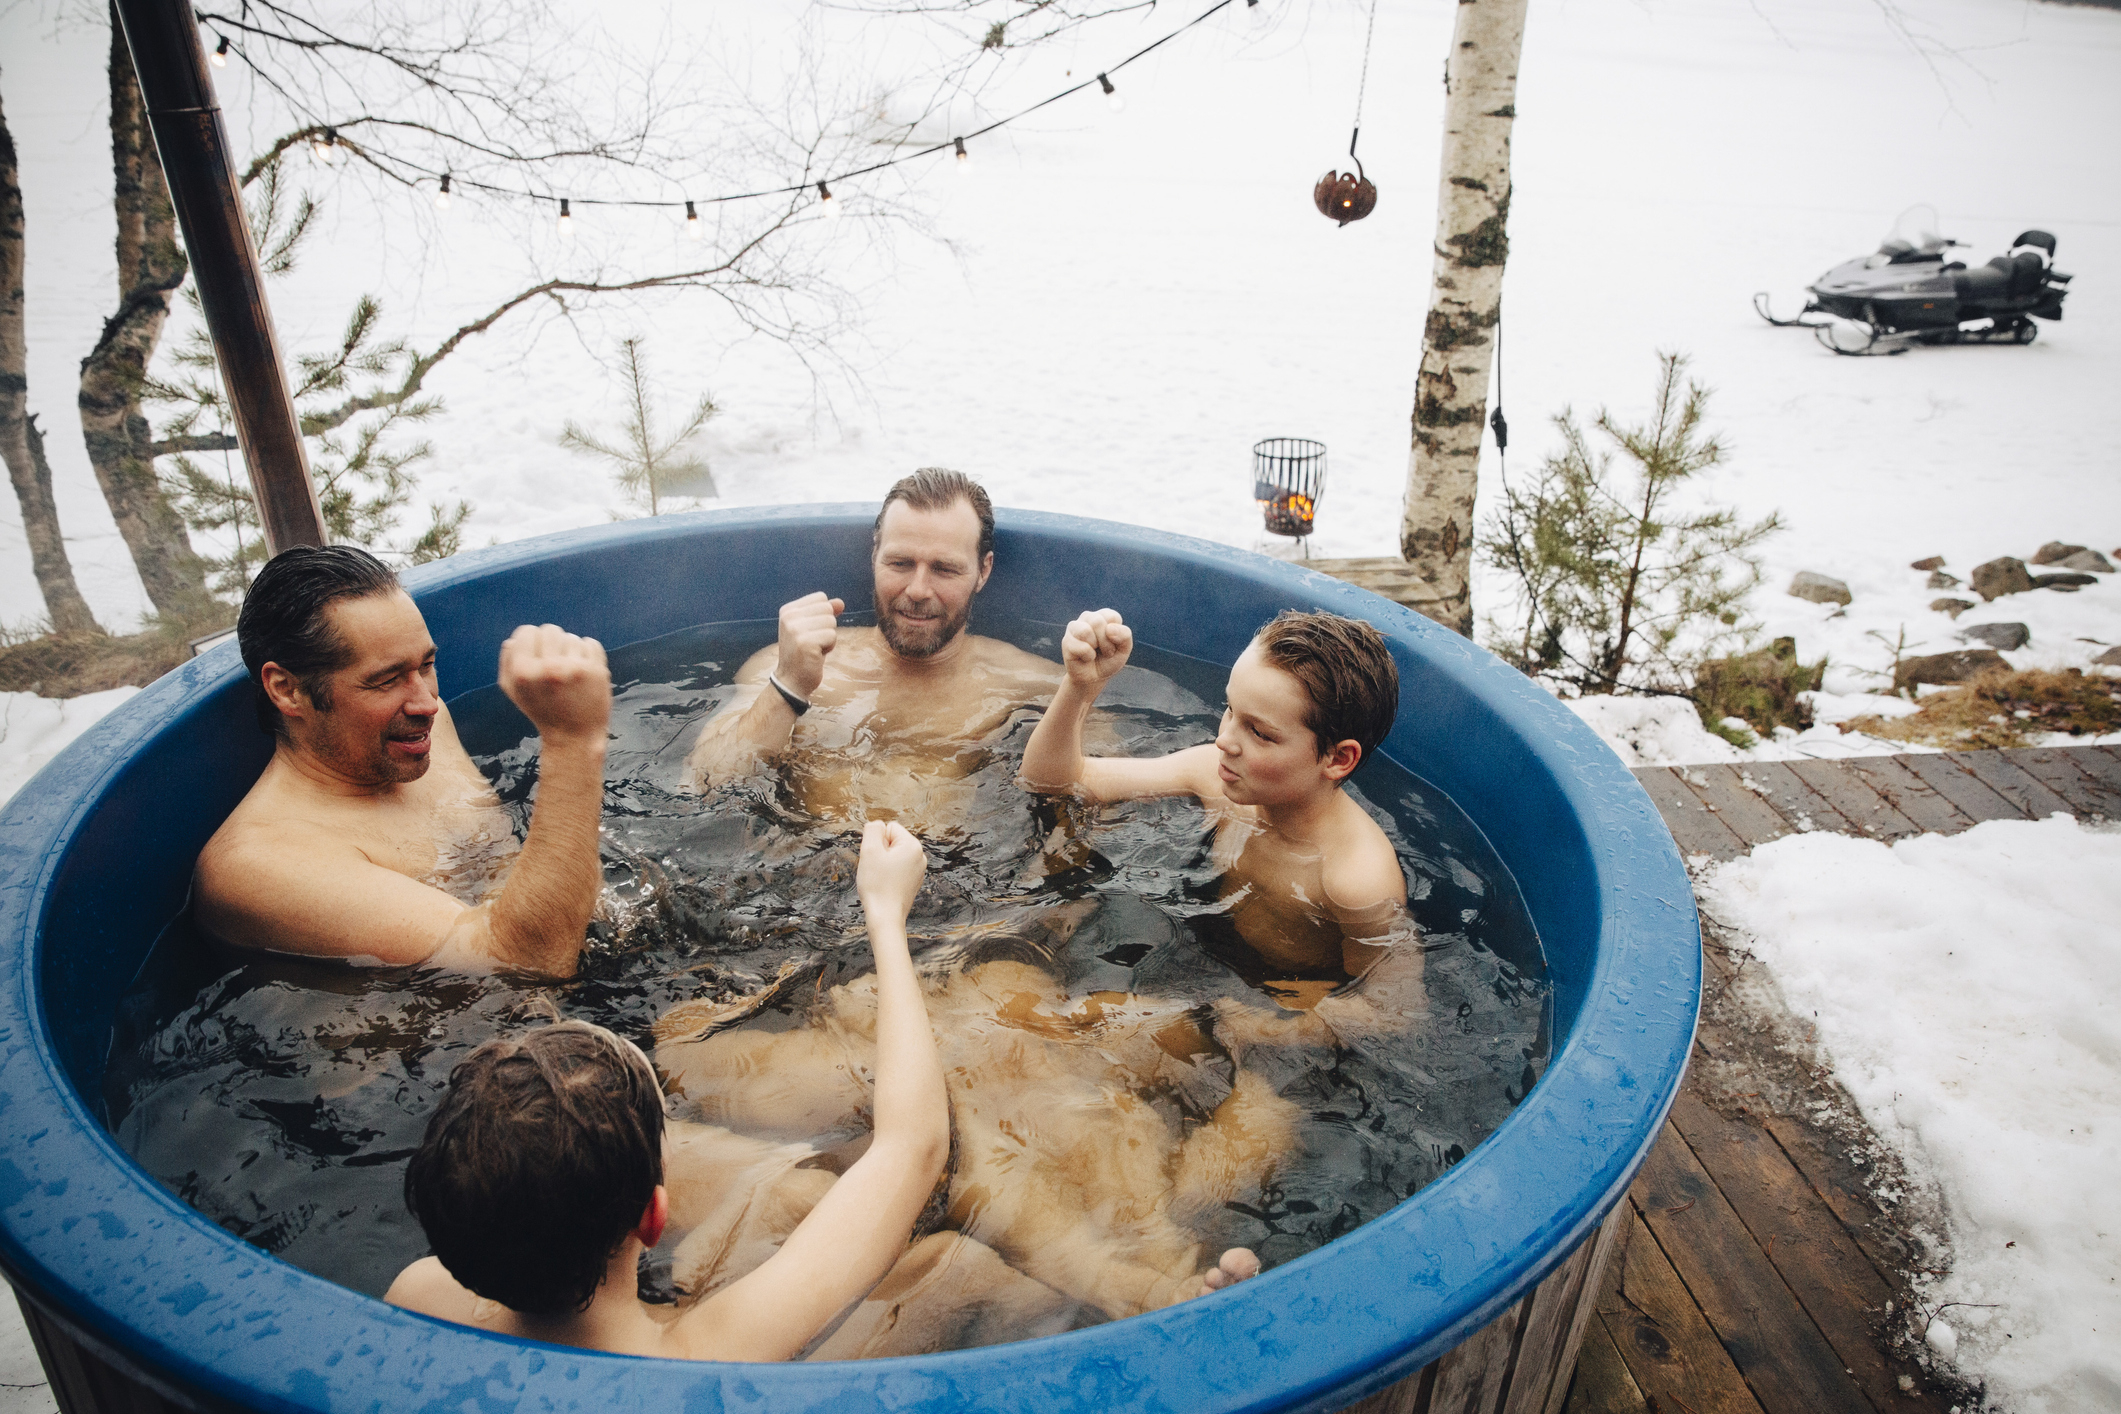 A group of men are in the hot tub